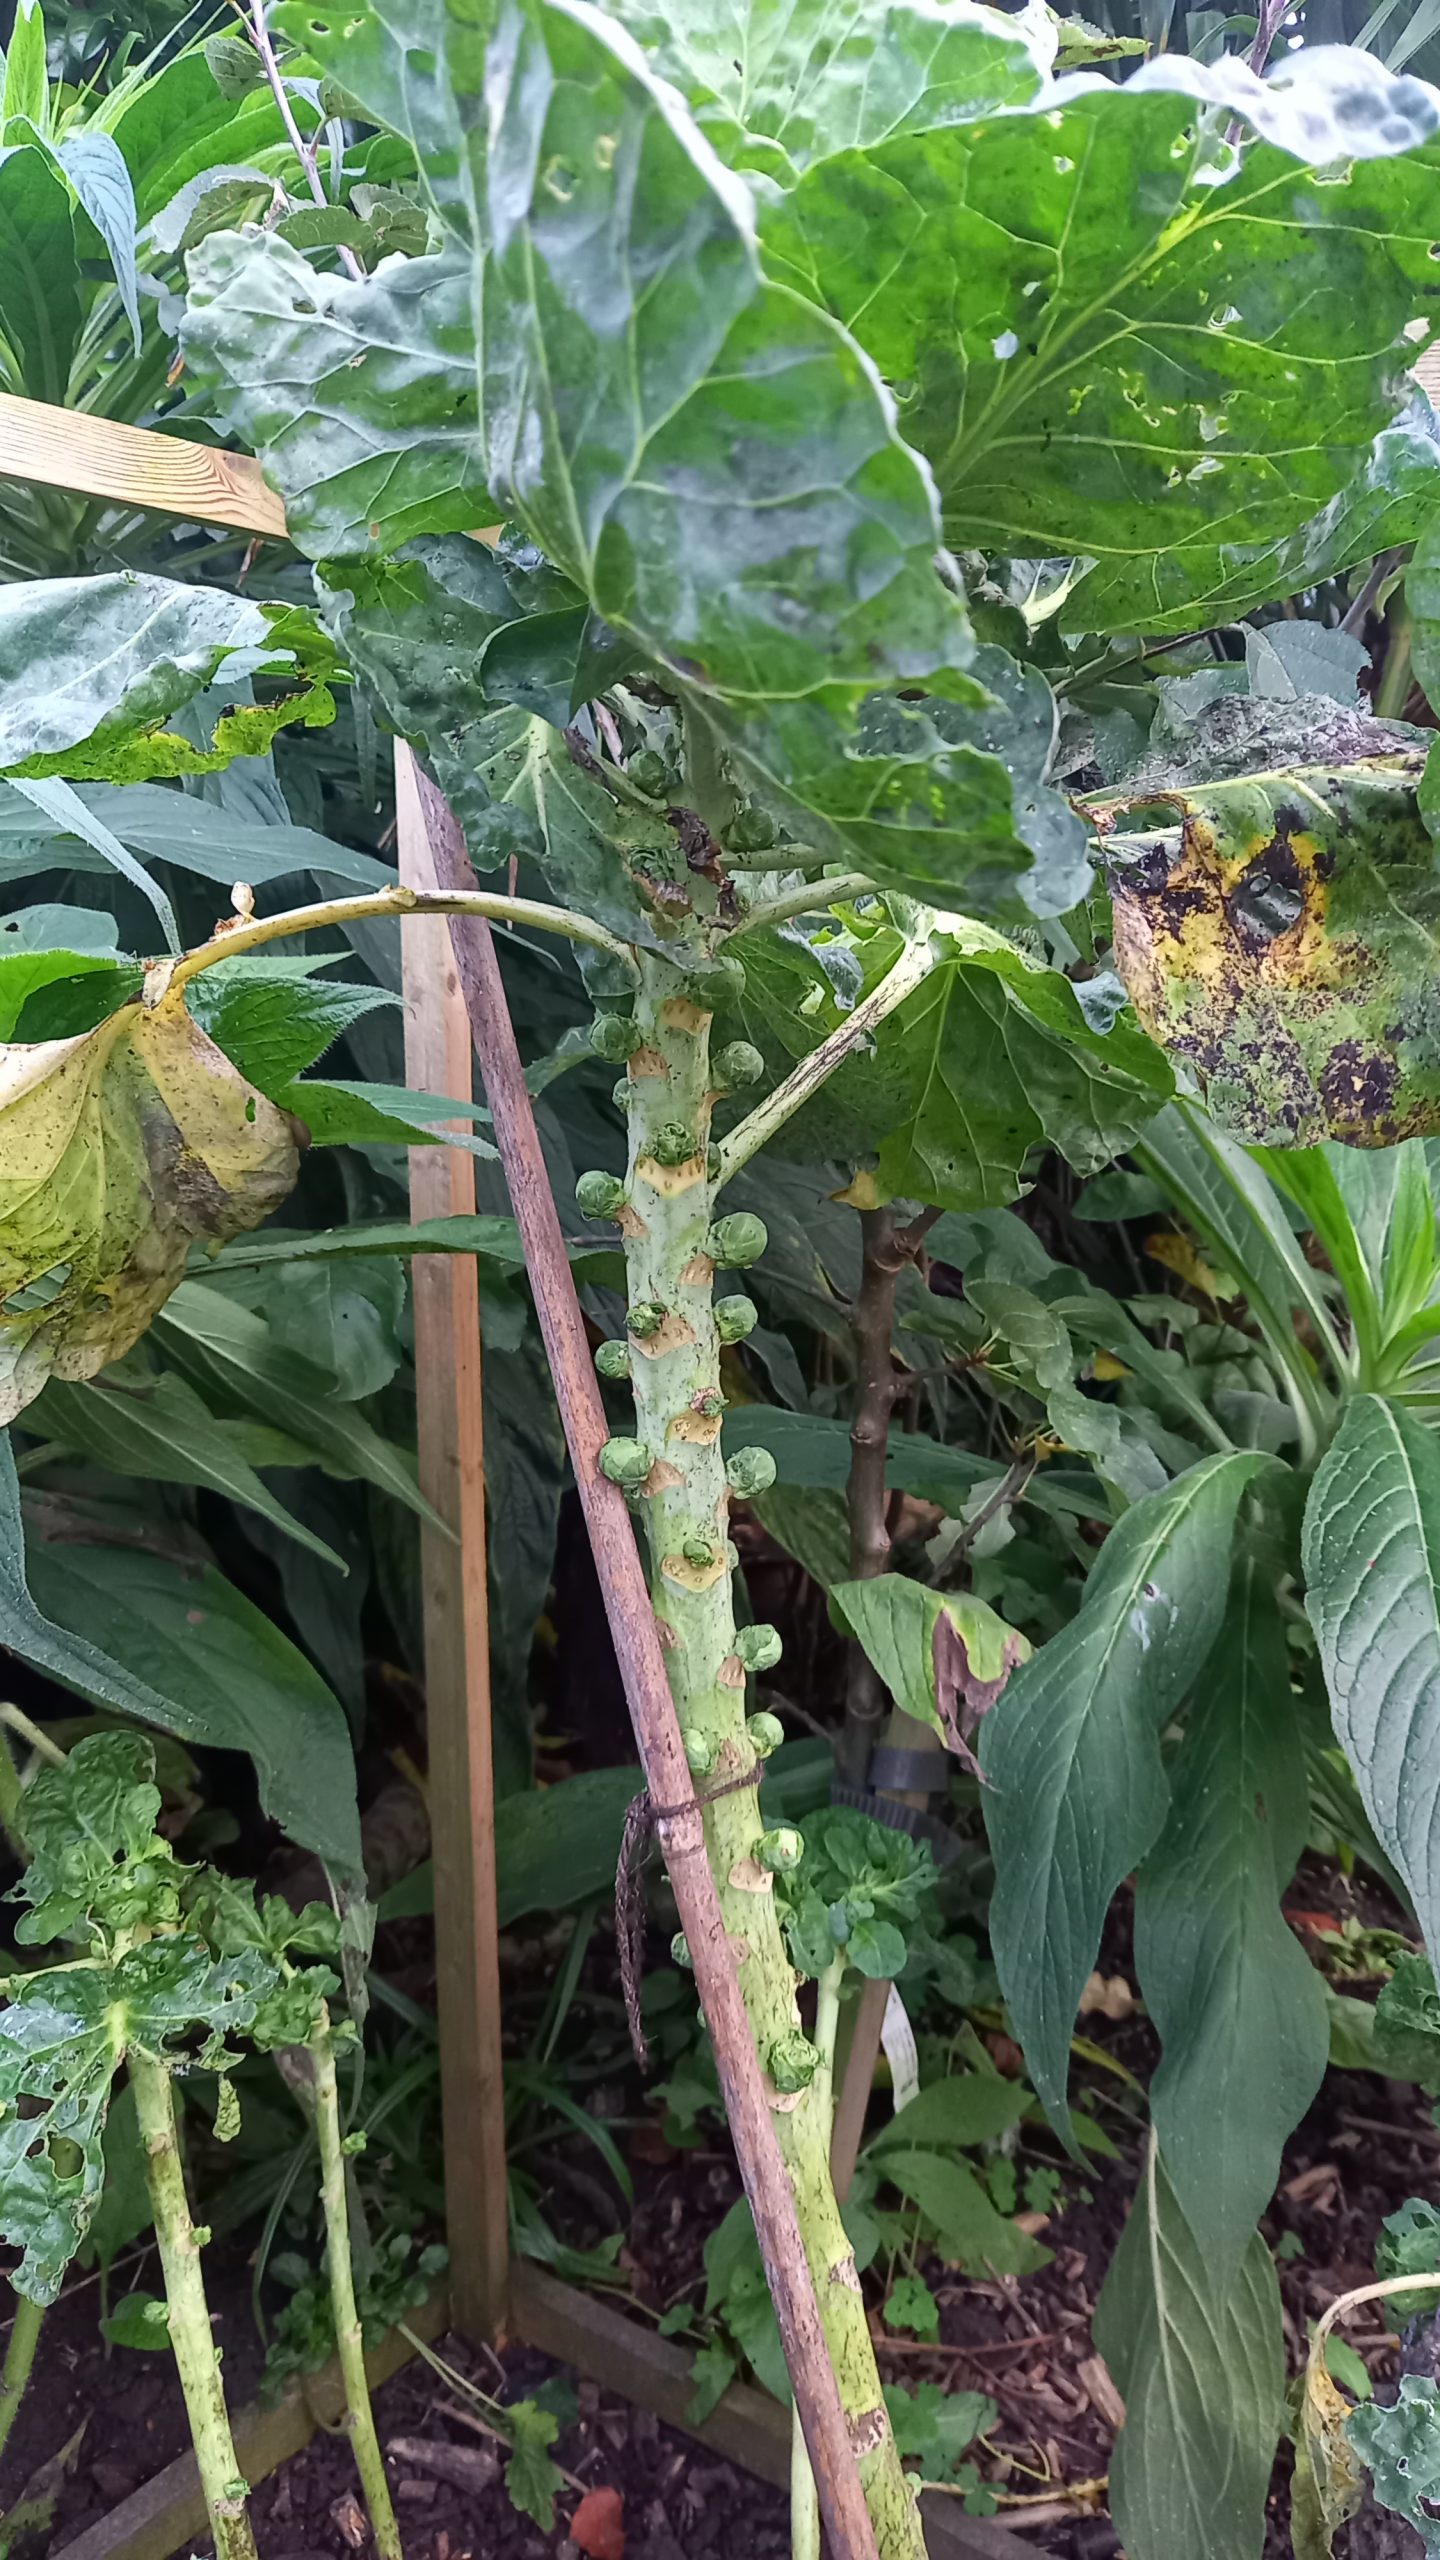 Small brussells sprouts forming on brussells sprout stalk supported by cane